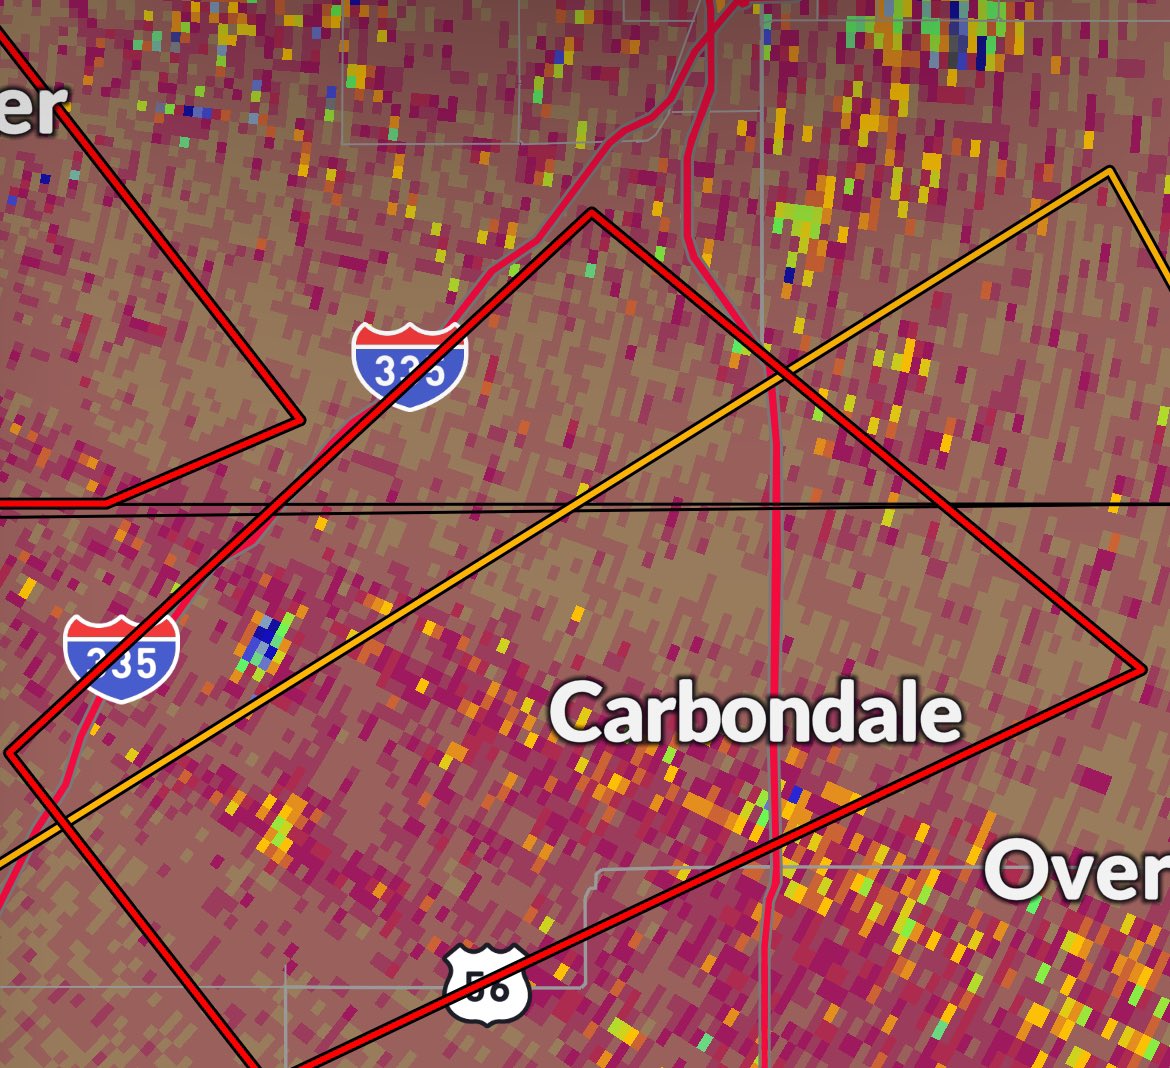 Tornadoes ongoing near Carbondale, KS. A tornado warning is in effect for the area until 10:00pm CDT.

Take cover now!

#tornado #severewx #wxtwitter #KSwx